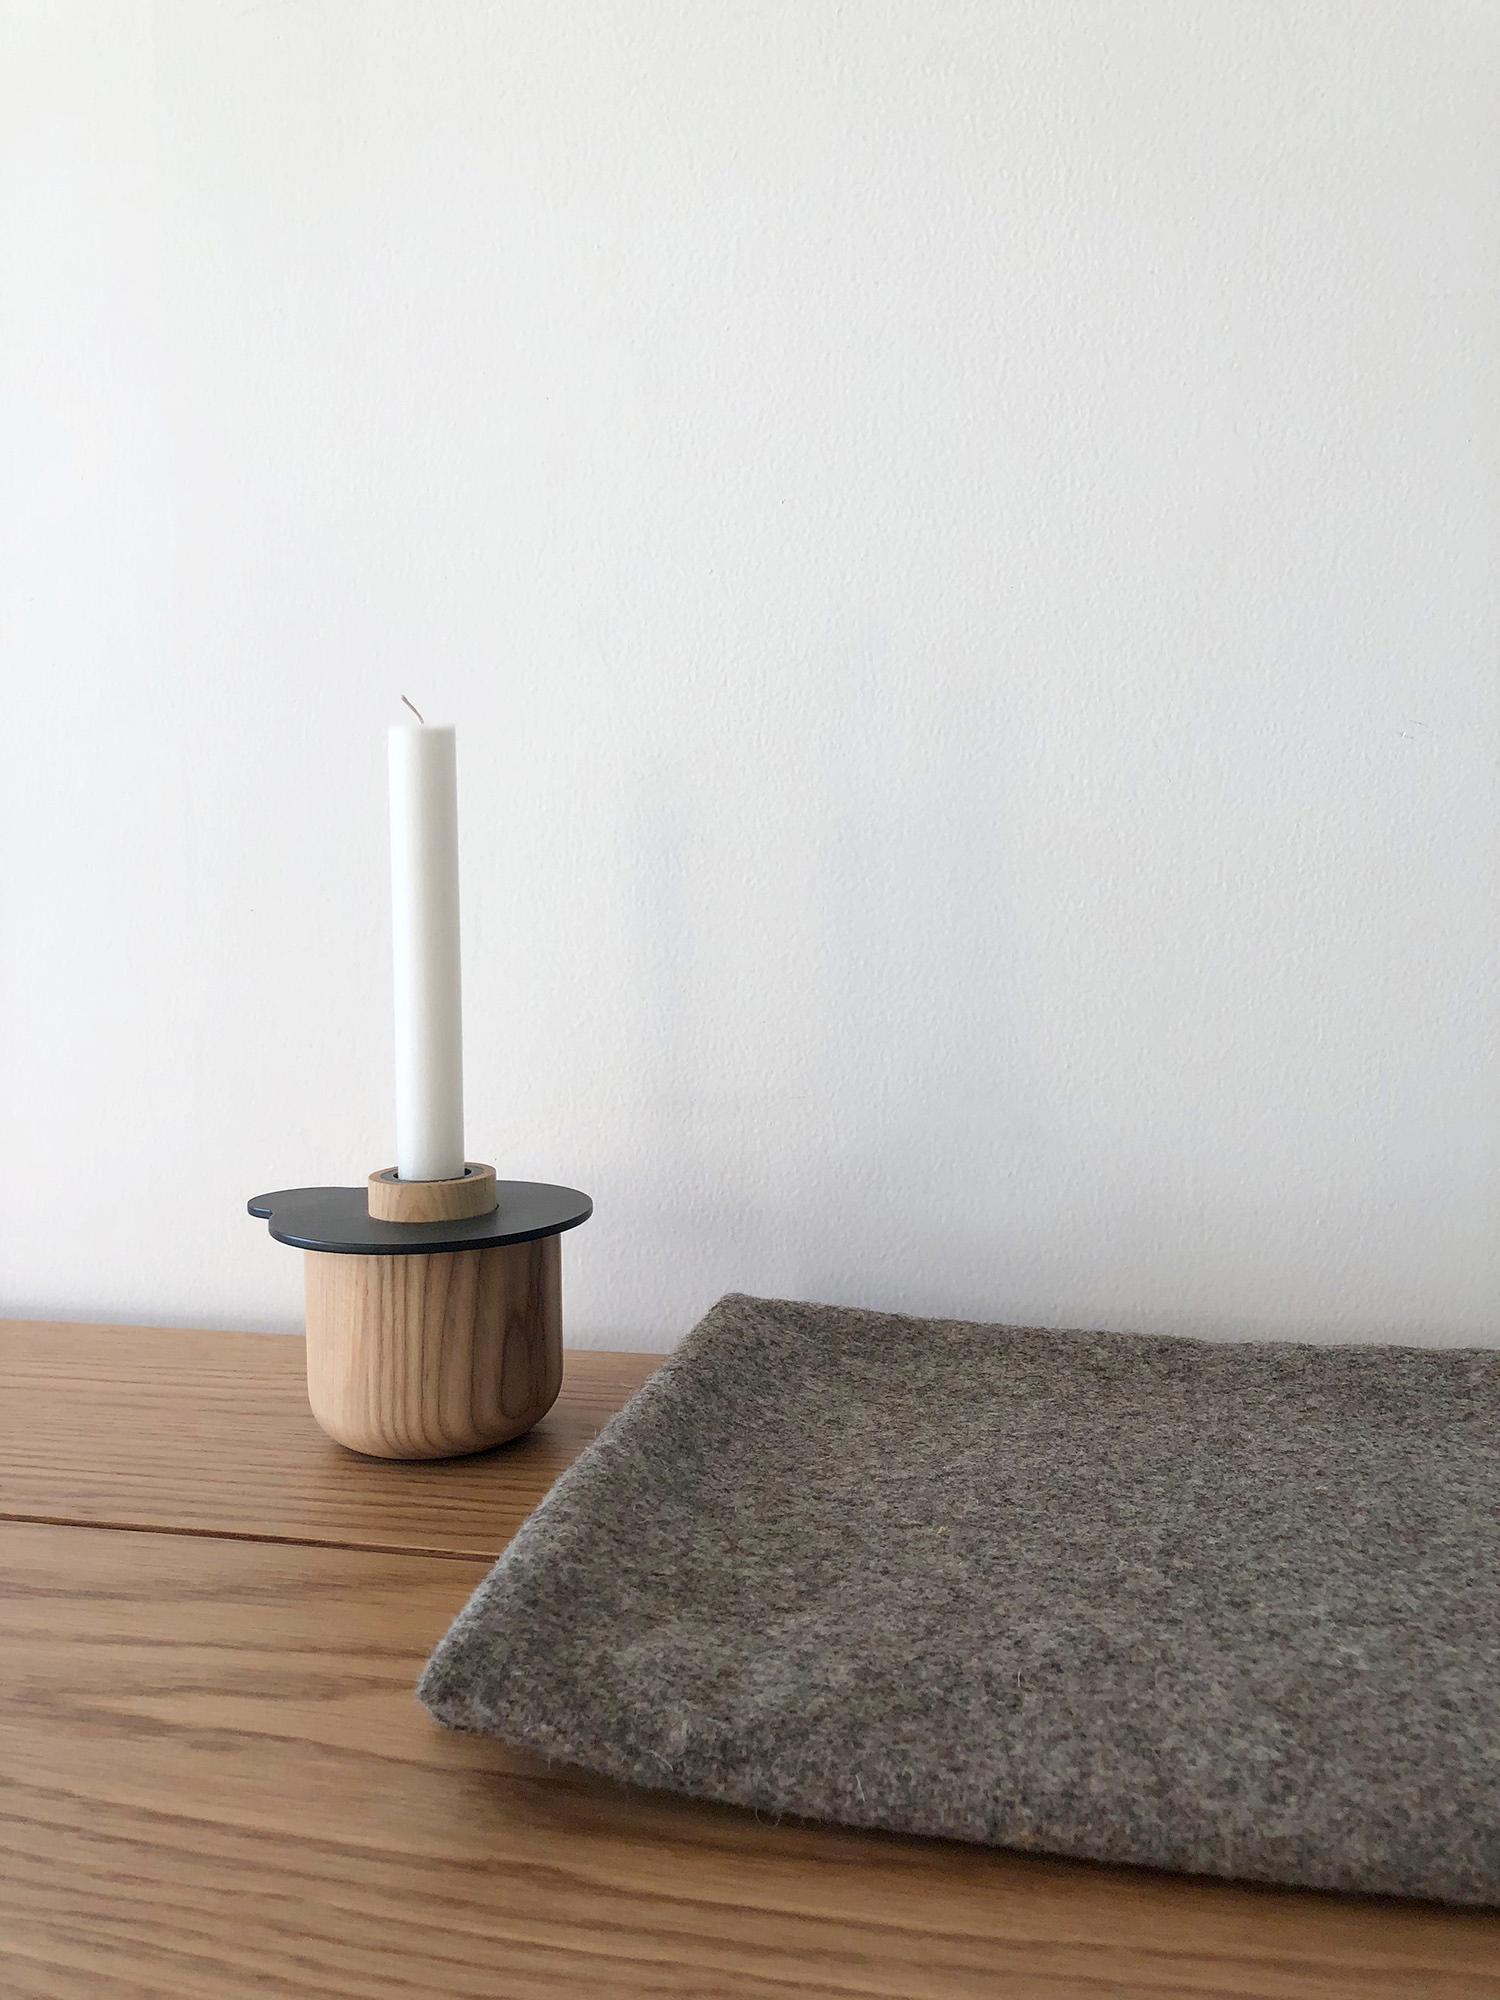 Kumo means cloud in Japanese and is inspired by the subtle curves of clouds 
Kumo is a minimal candle holder made of laser cut steel and oak handcrafted. 
The steel is painted by a light color palette inspired on how clouds reflect natural colors